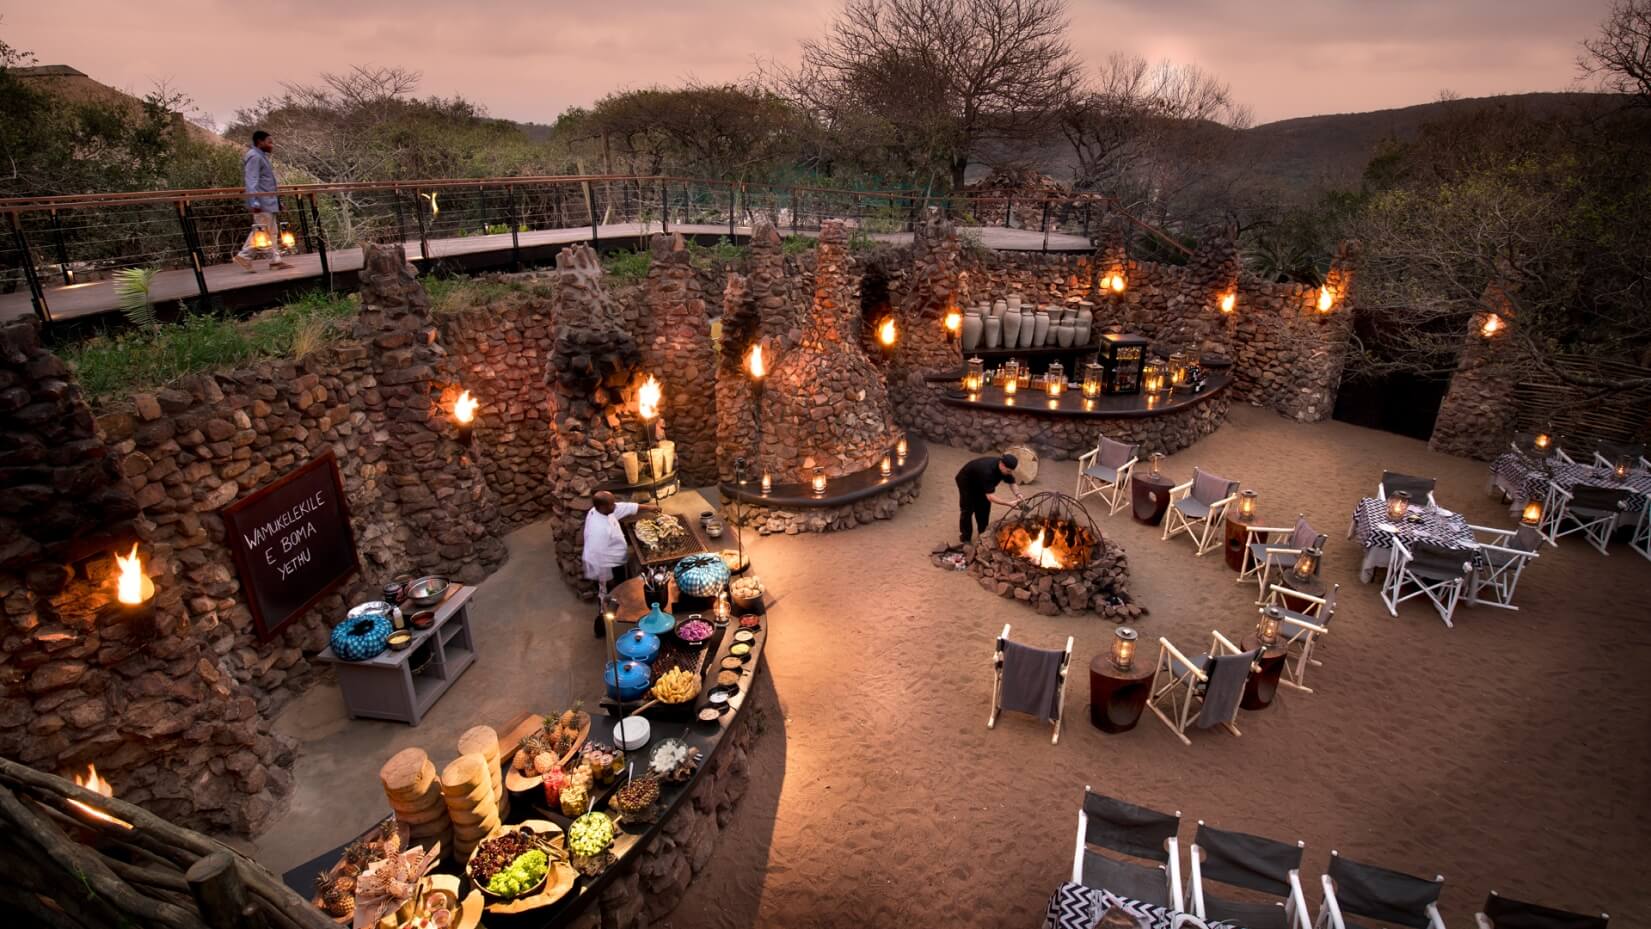 Dusk settles on the boma at Phinda Mountain